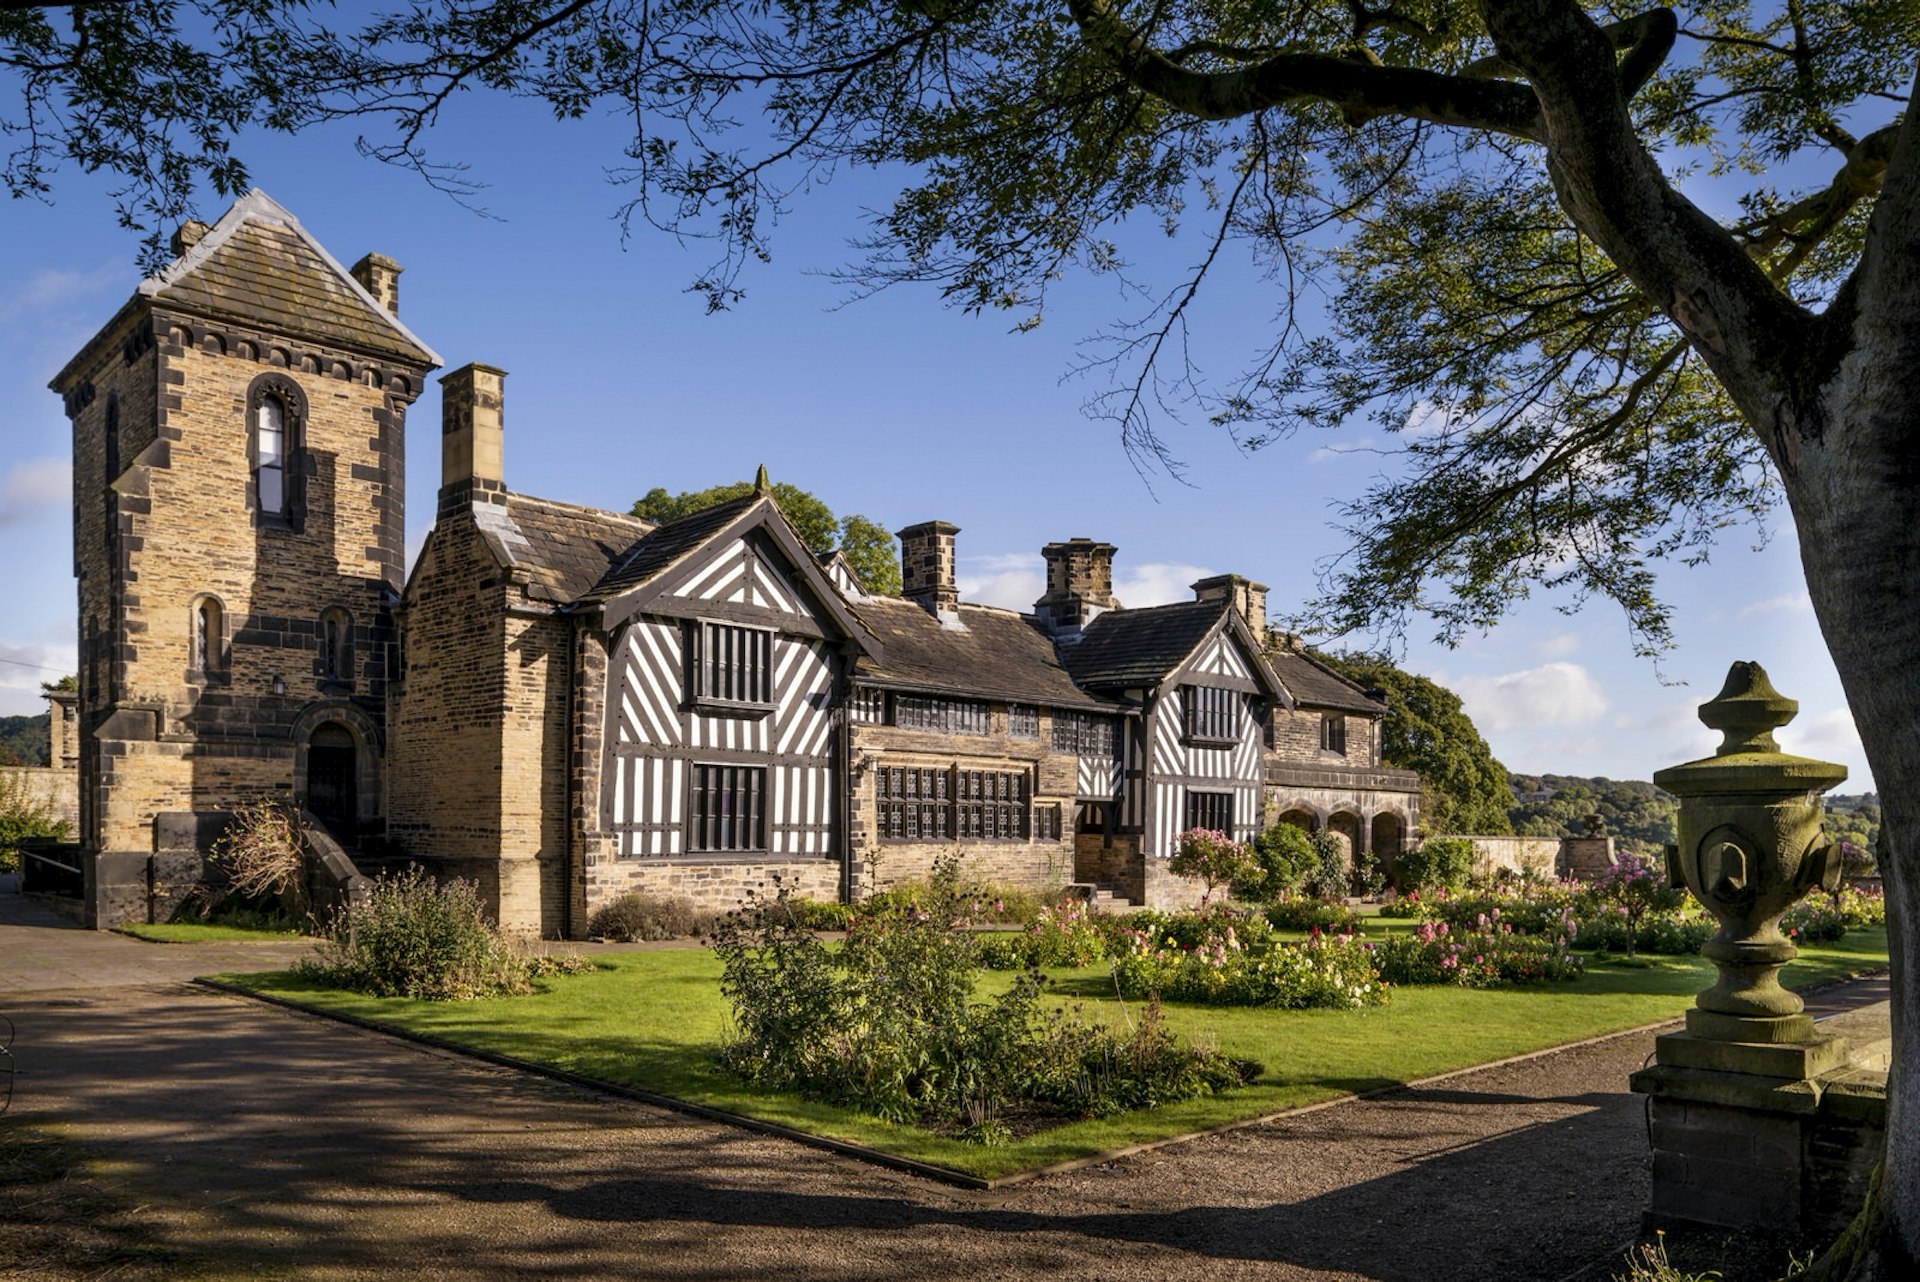 The exterior of Shibden Hall on a sunny day, featuring its Tudor half-timbered frontage